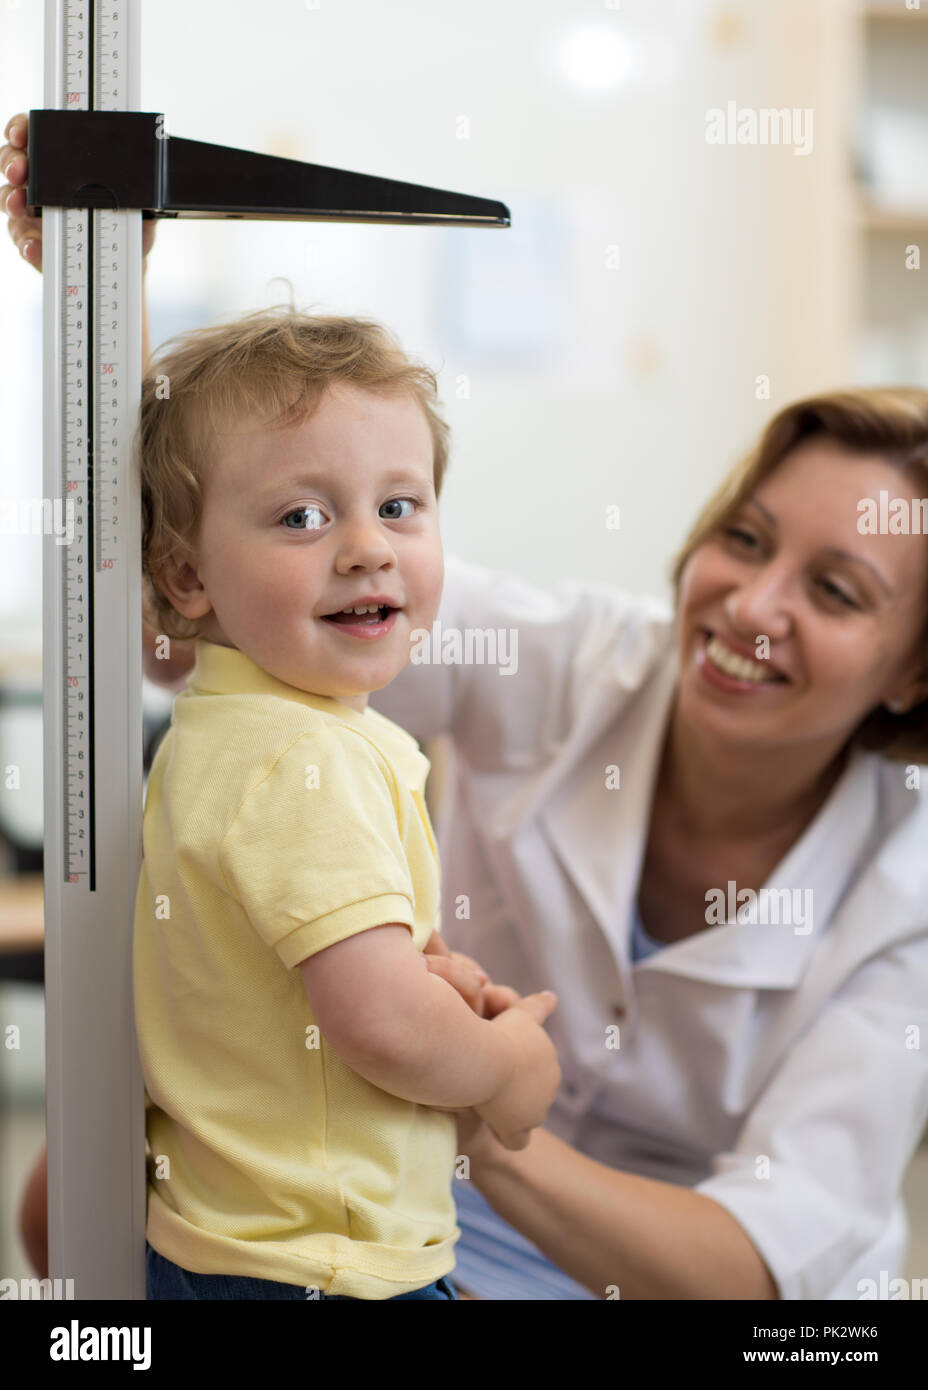 Female doctor measuring height of little boy in clinic Stock Photo